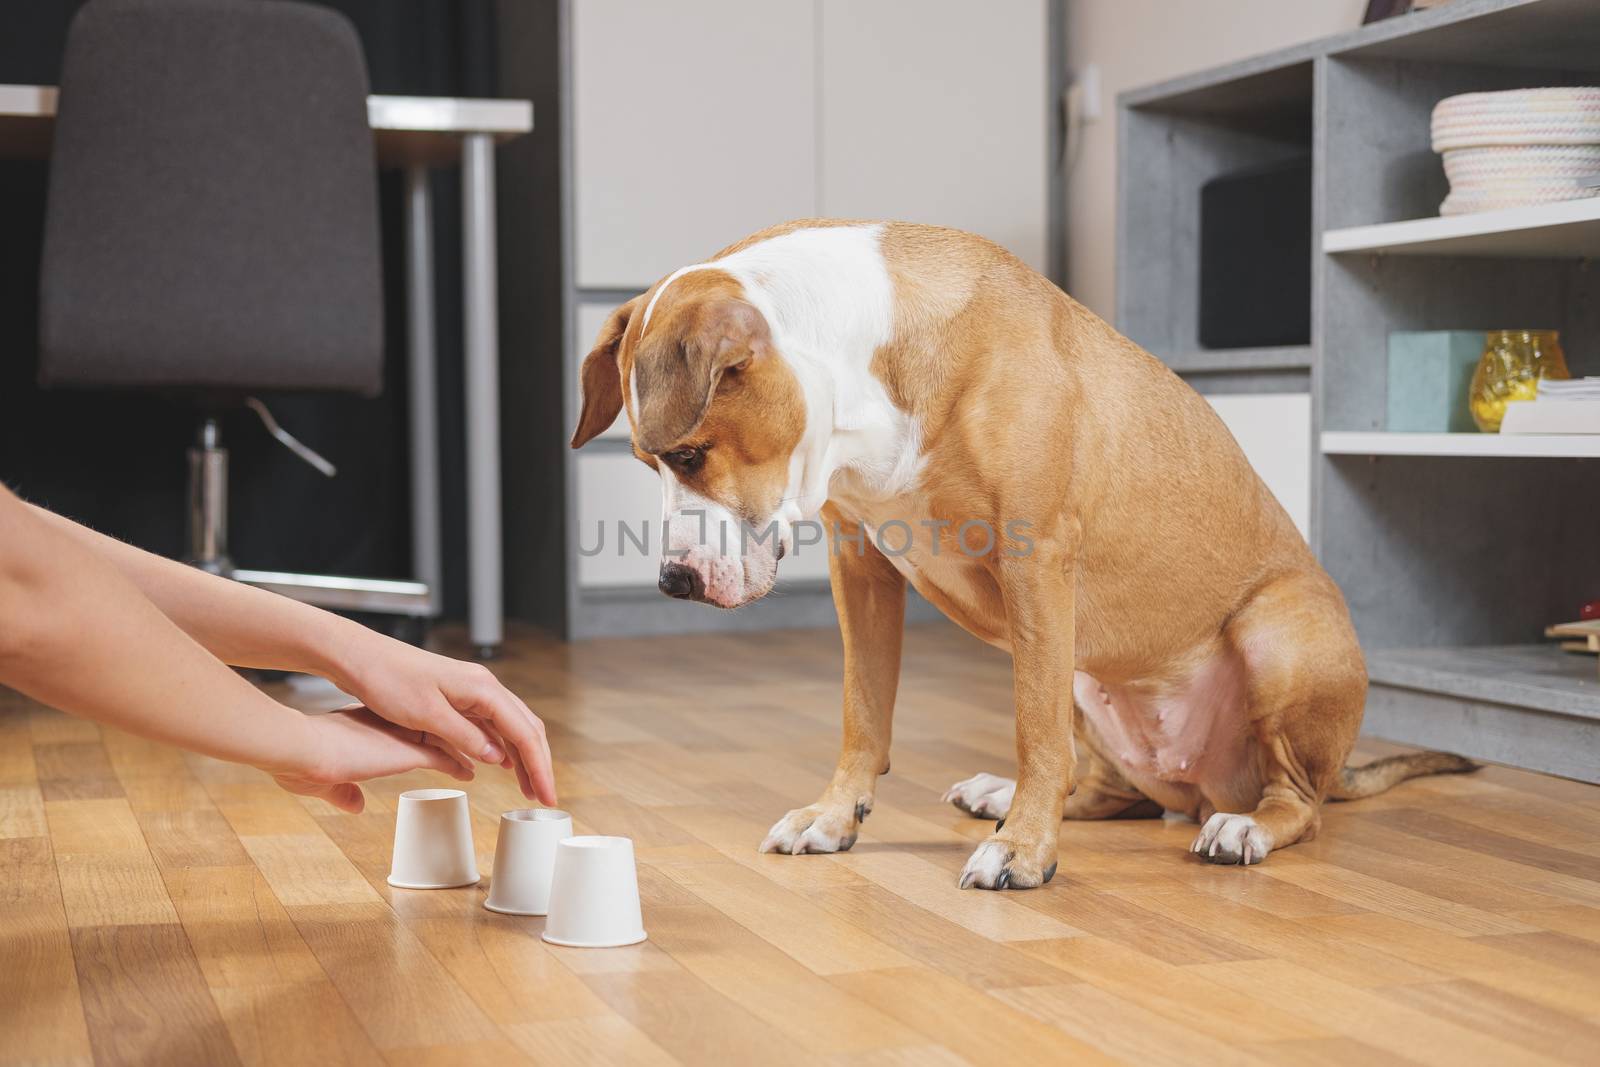 Cute dog playing the shell game with her human. Concept of training pets, domestic dogs being smart and educated